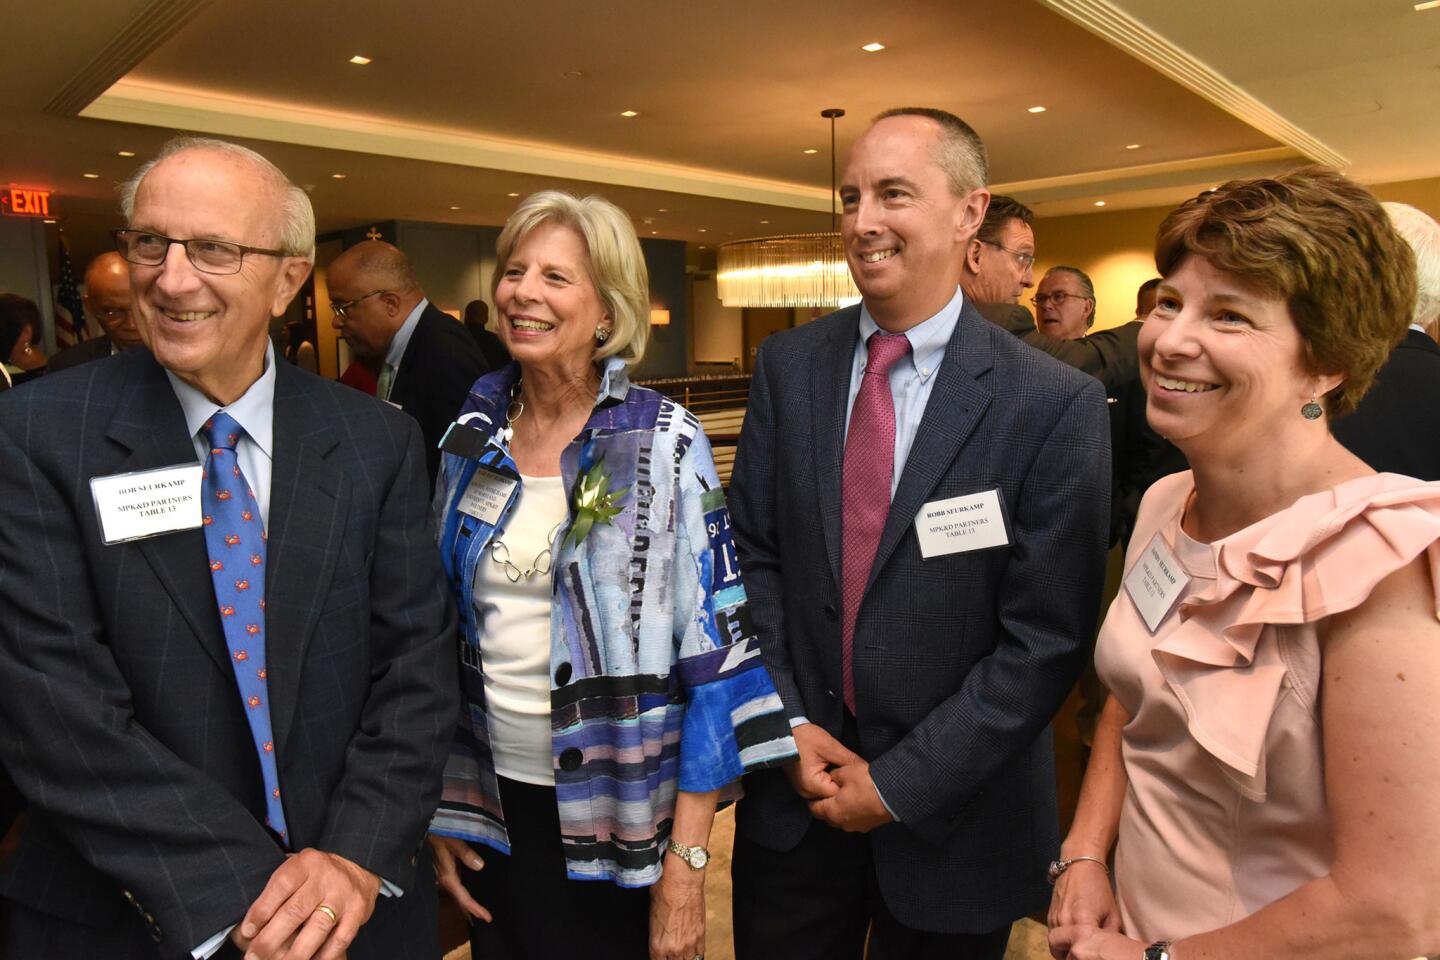 Bob and Mary Seurkamp with their son, Robb Seurkamp, and his wife Andrea Seurkamp, at the Baltimore Sun Hall of Fame party at the Center Club.